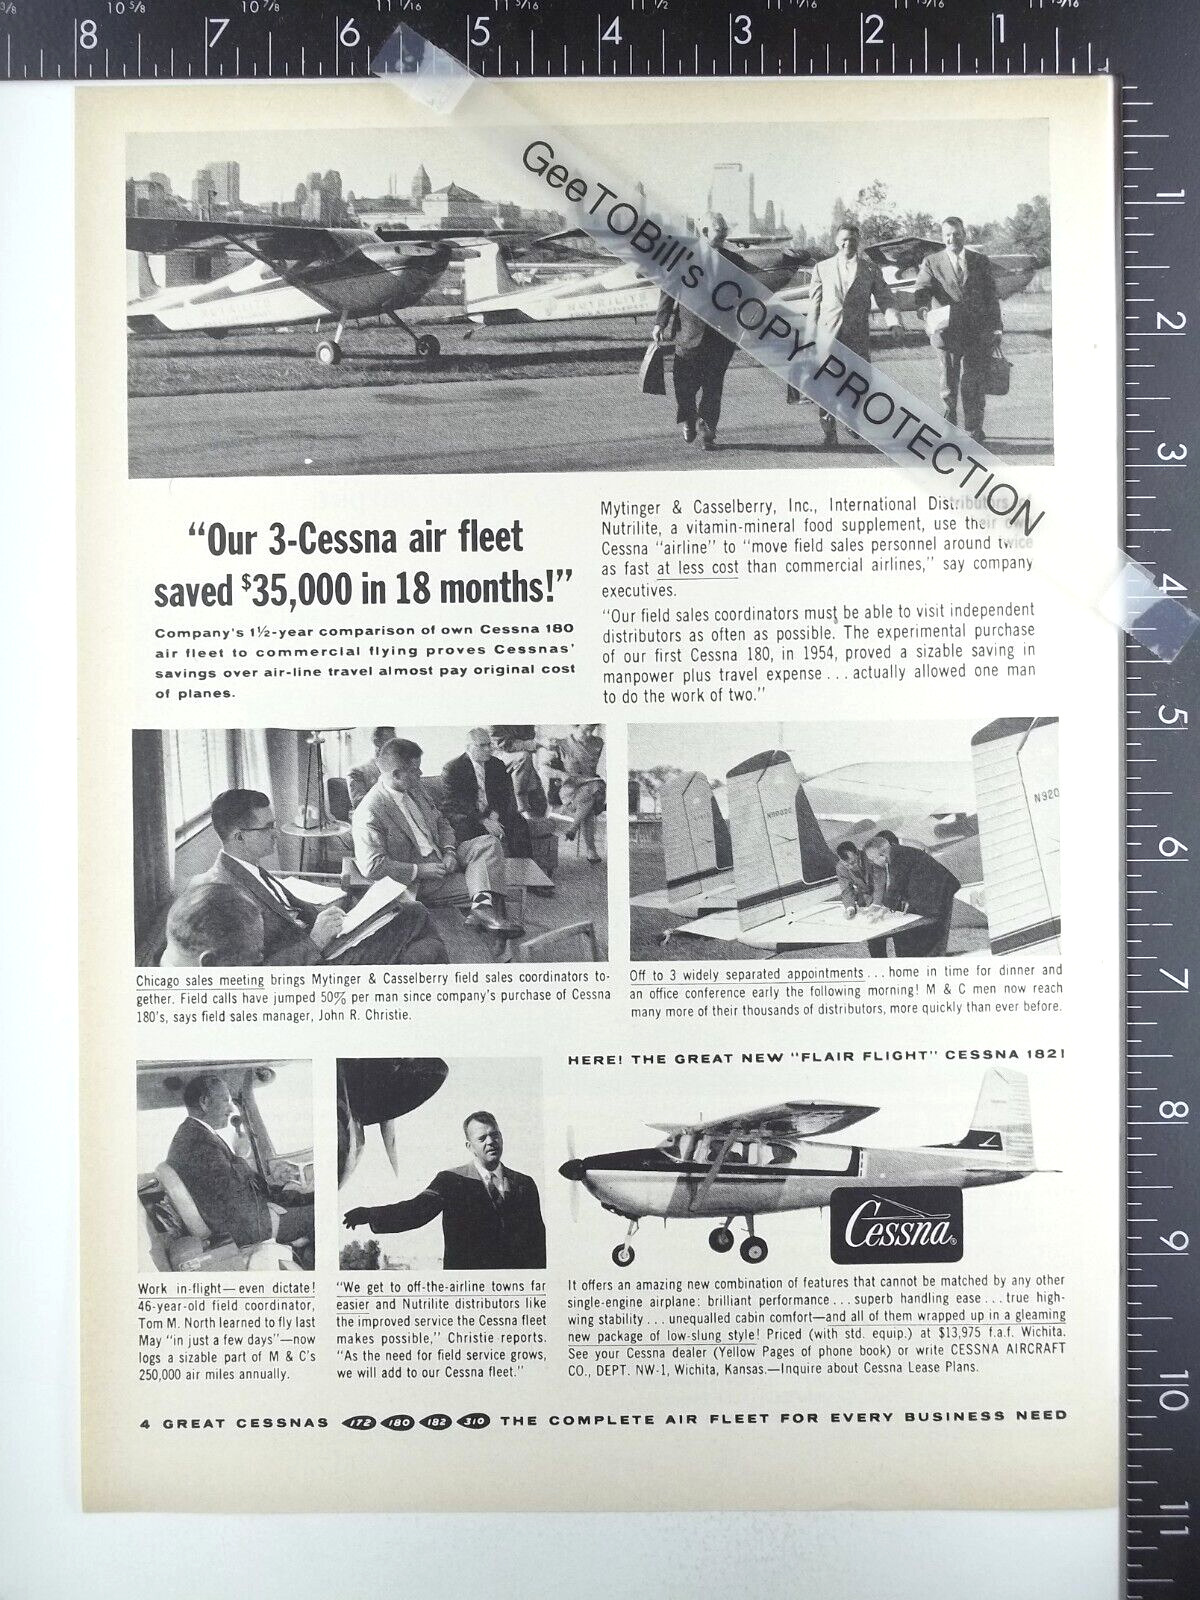 1957 ADVERTISING, Cessna 180 airplane aircraft 1958 1959 Mytinger & Casselberry